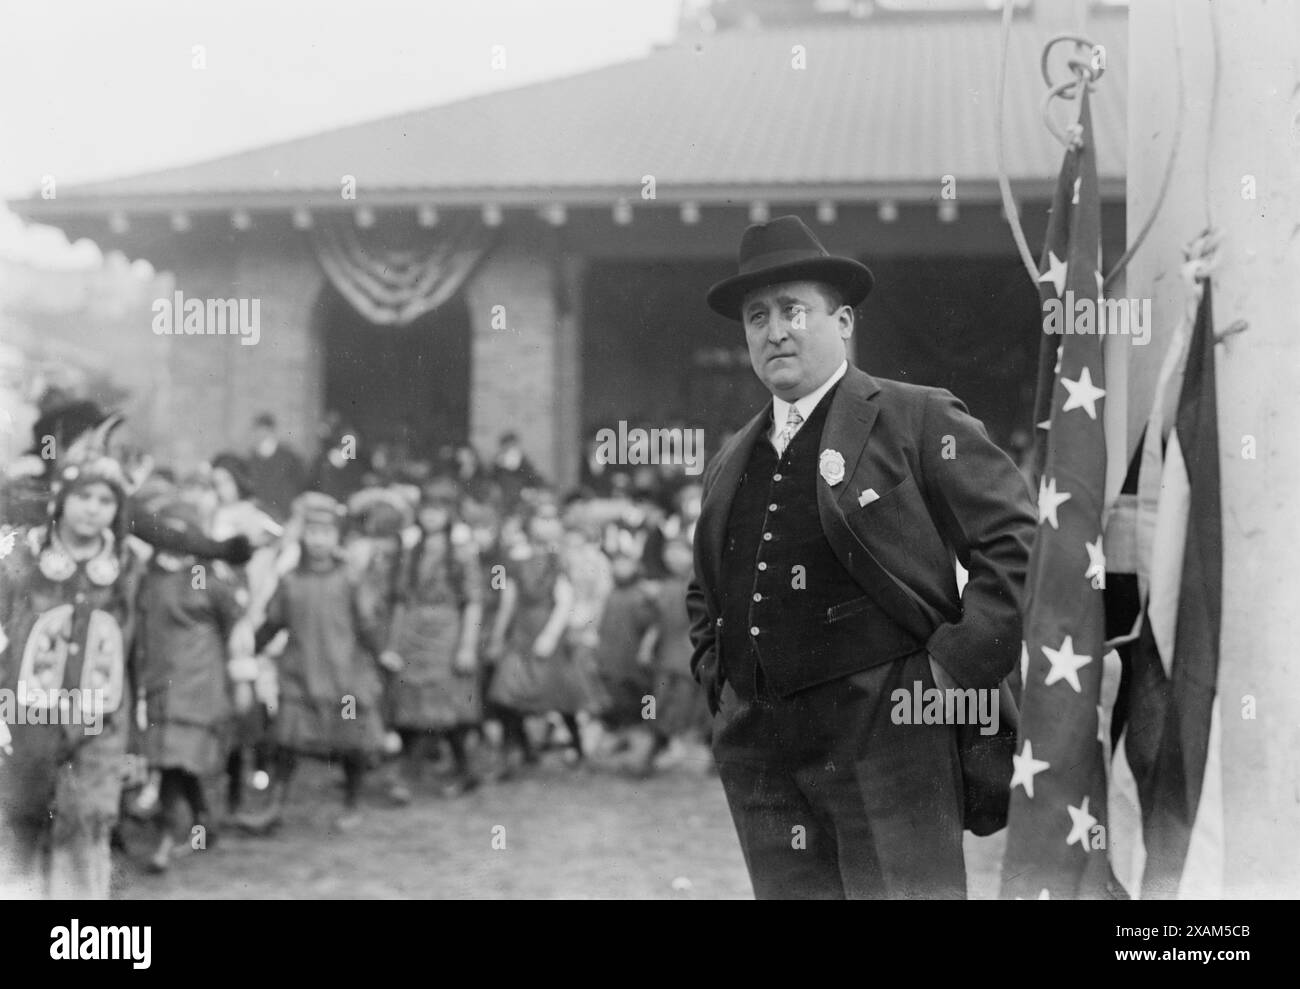 Wm. J. Lee, 1913. Shows Supervisor of Recreation William J. Lee attending the children's pageant at the dedication of the William J. Gaynor Park Playground and Recreation House in New York City, Dec. 20, 1913. Stock Photo